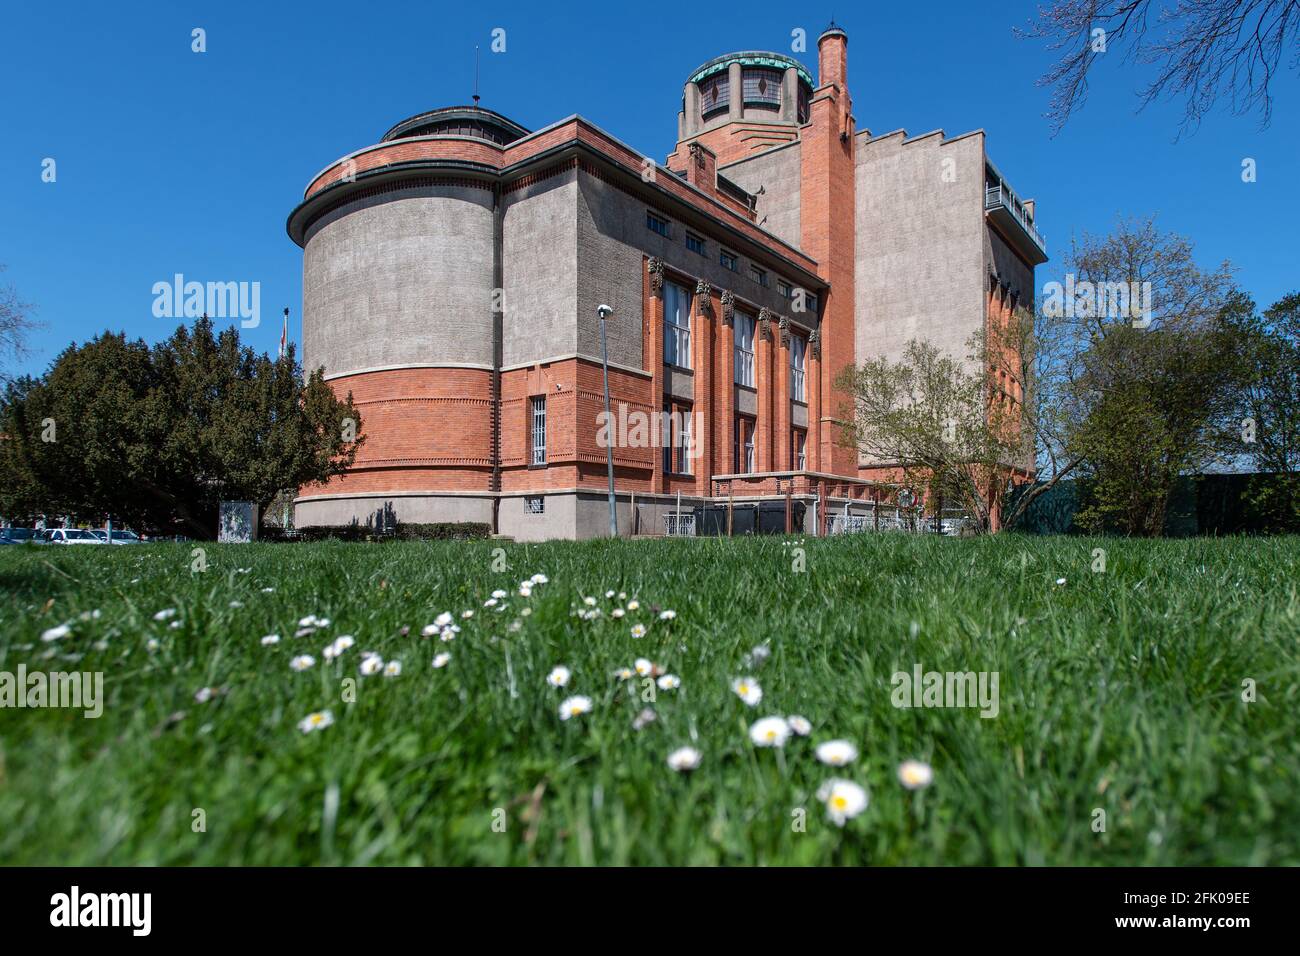 Hradec Kralove, Czech Republic. 27th Apr, 2021. The East Bohemian Museum in Hradec Kralove, Czech Republic, April 27, 2021. The museum was built according to the project of Jan Kotera in 1909-1912. Credit: David Tanecek/CTK Photo/Alamy Live News Stock Photo